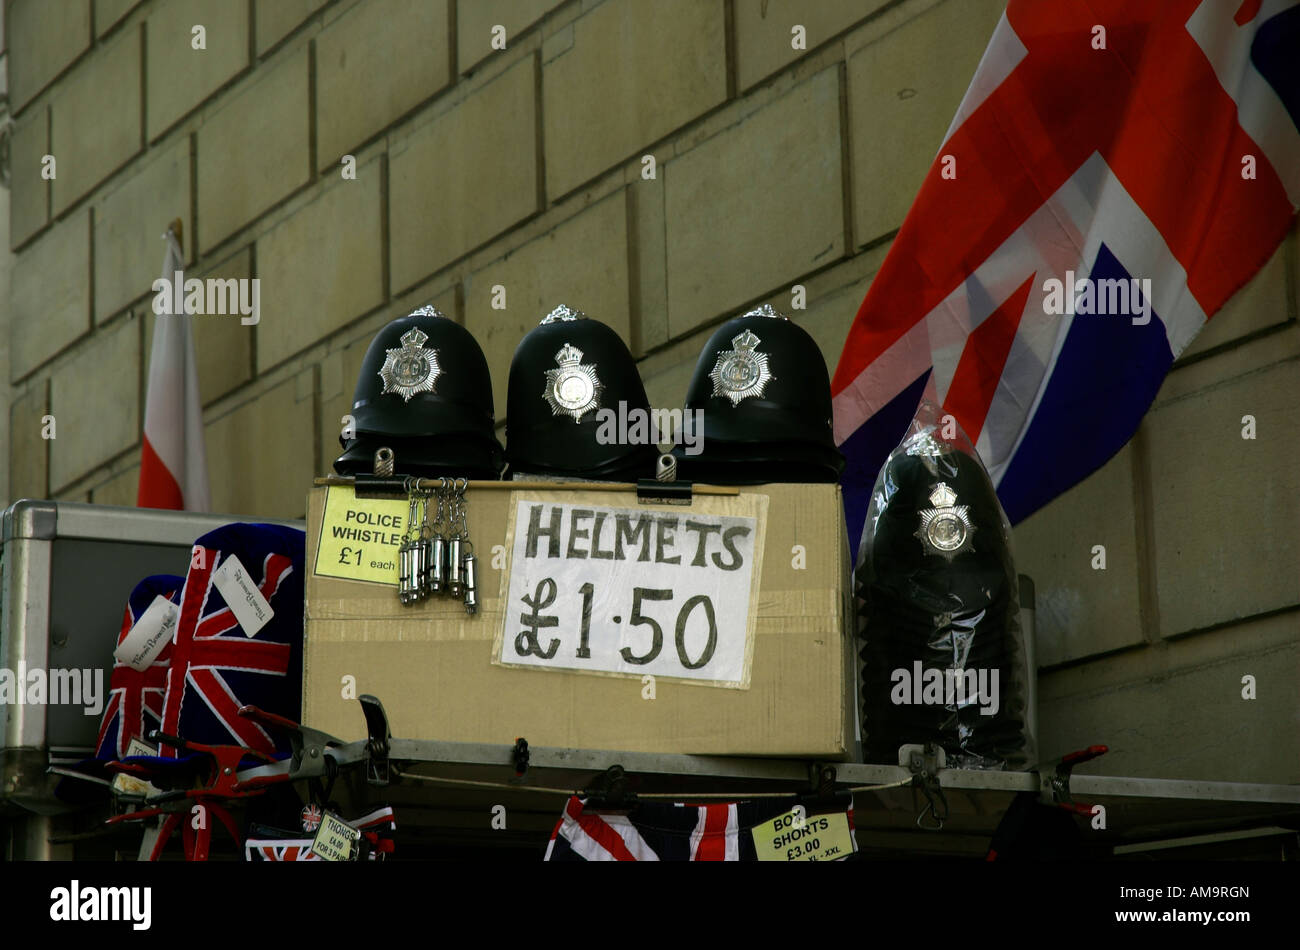 Novelty English policemen helmets for sale in London Stock Photo